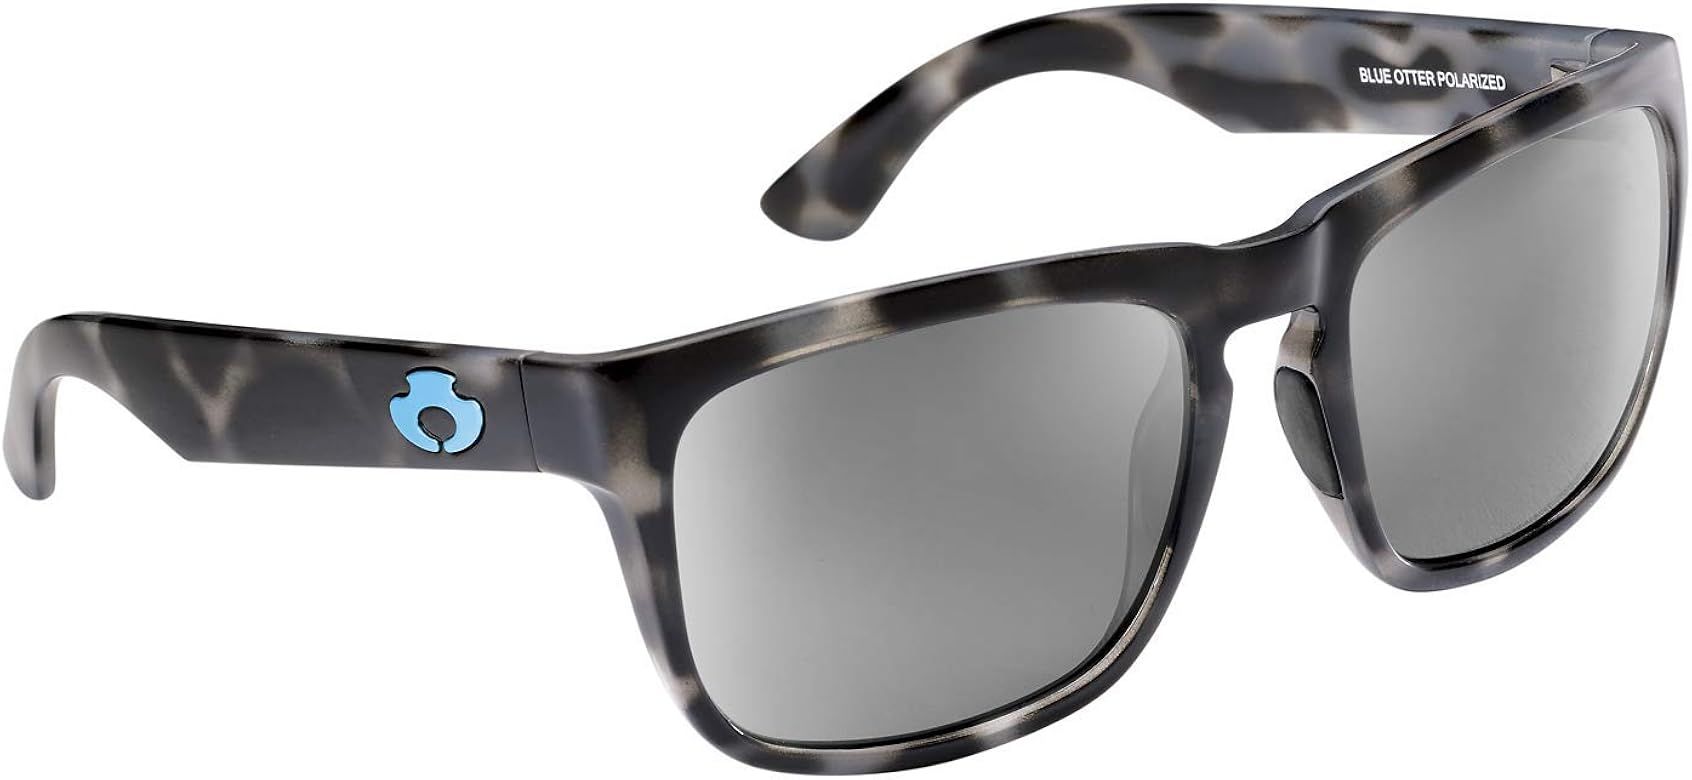 Blue Otter Polarized Sunglasses Cumberland - Nylon Lenses Manufactured by Carl Zeiss Vision. | Amazon (US)